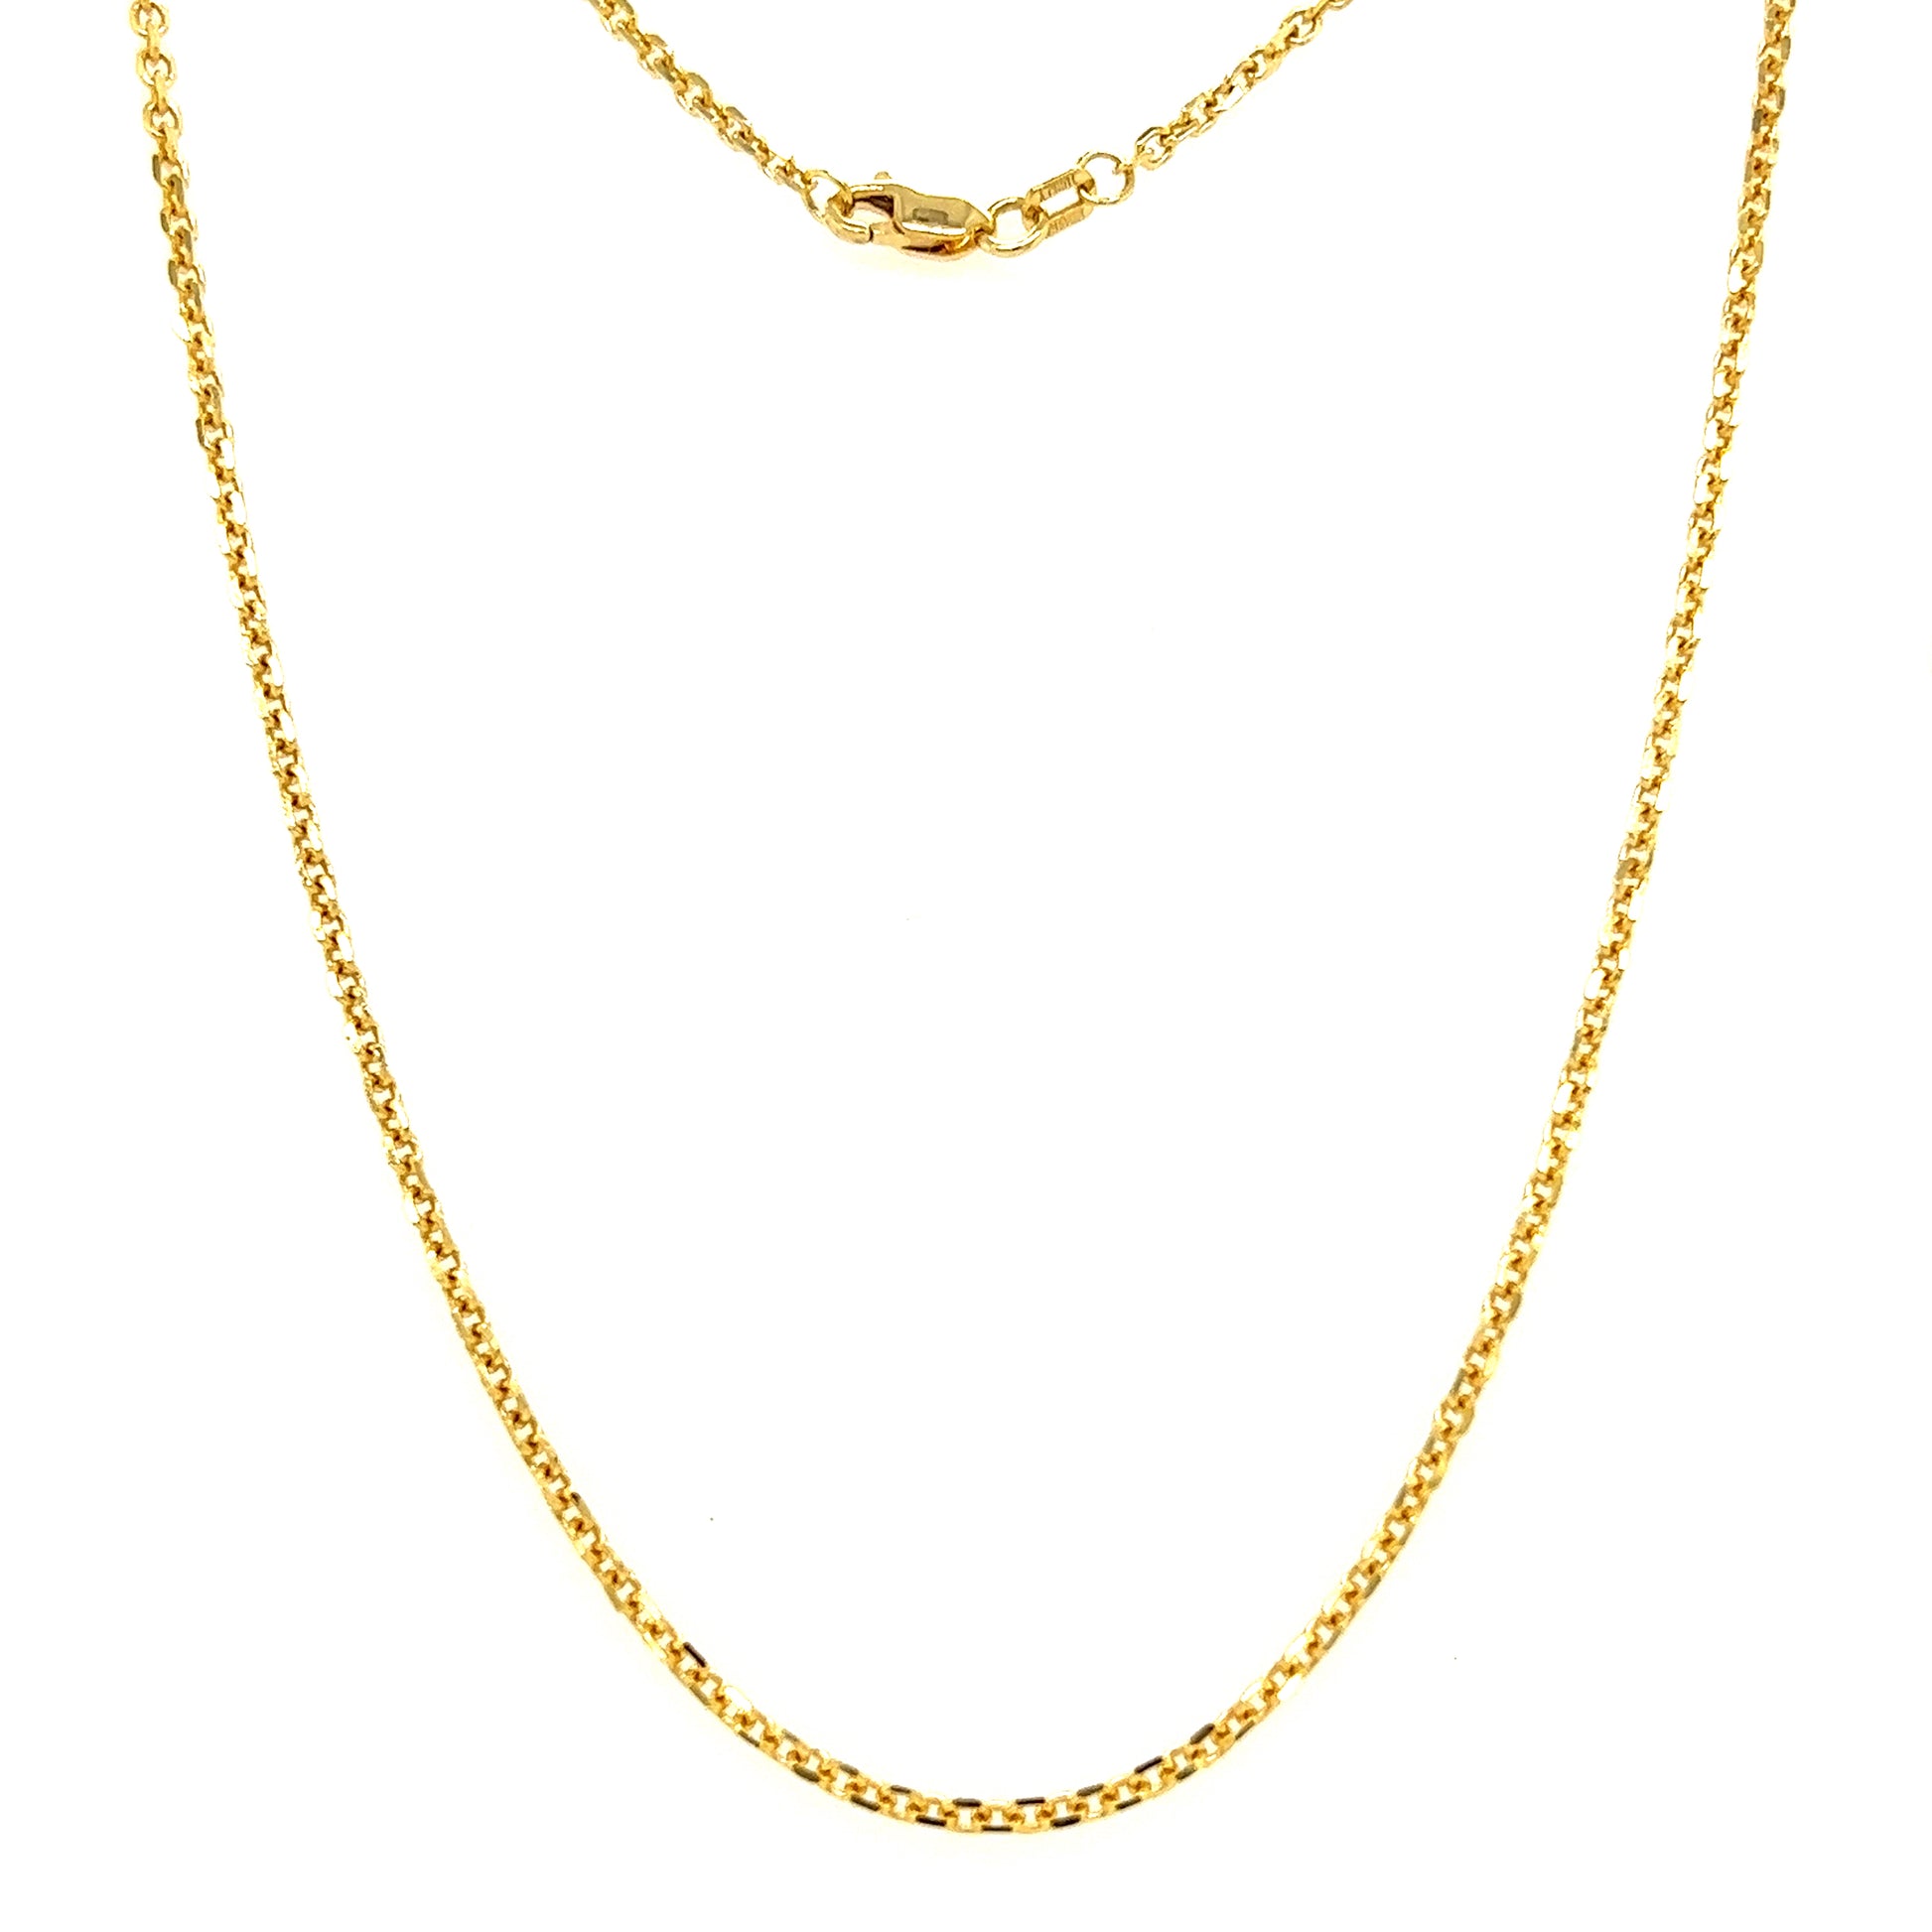 Cable Chain 1.8mm in 14K Yellow Gold Full Chain Front View